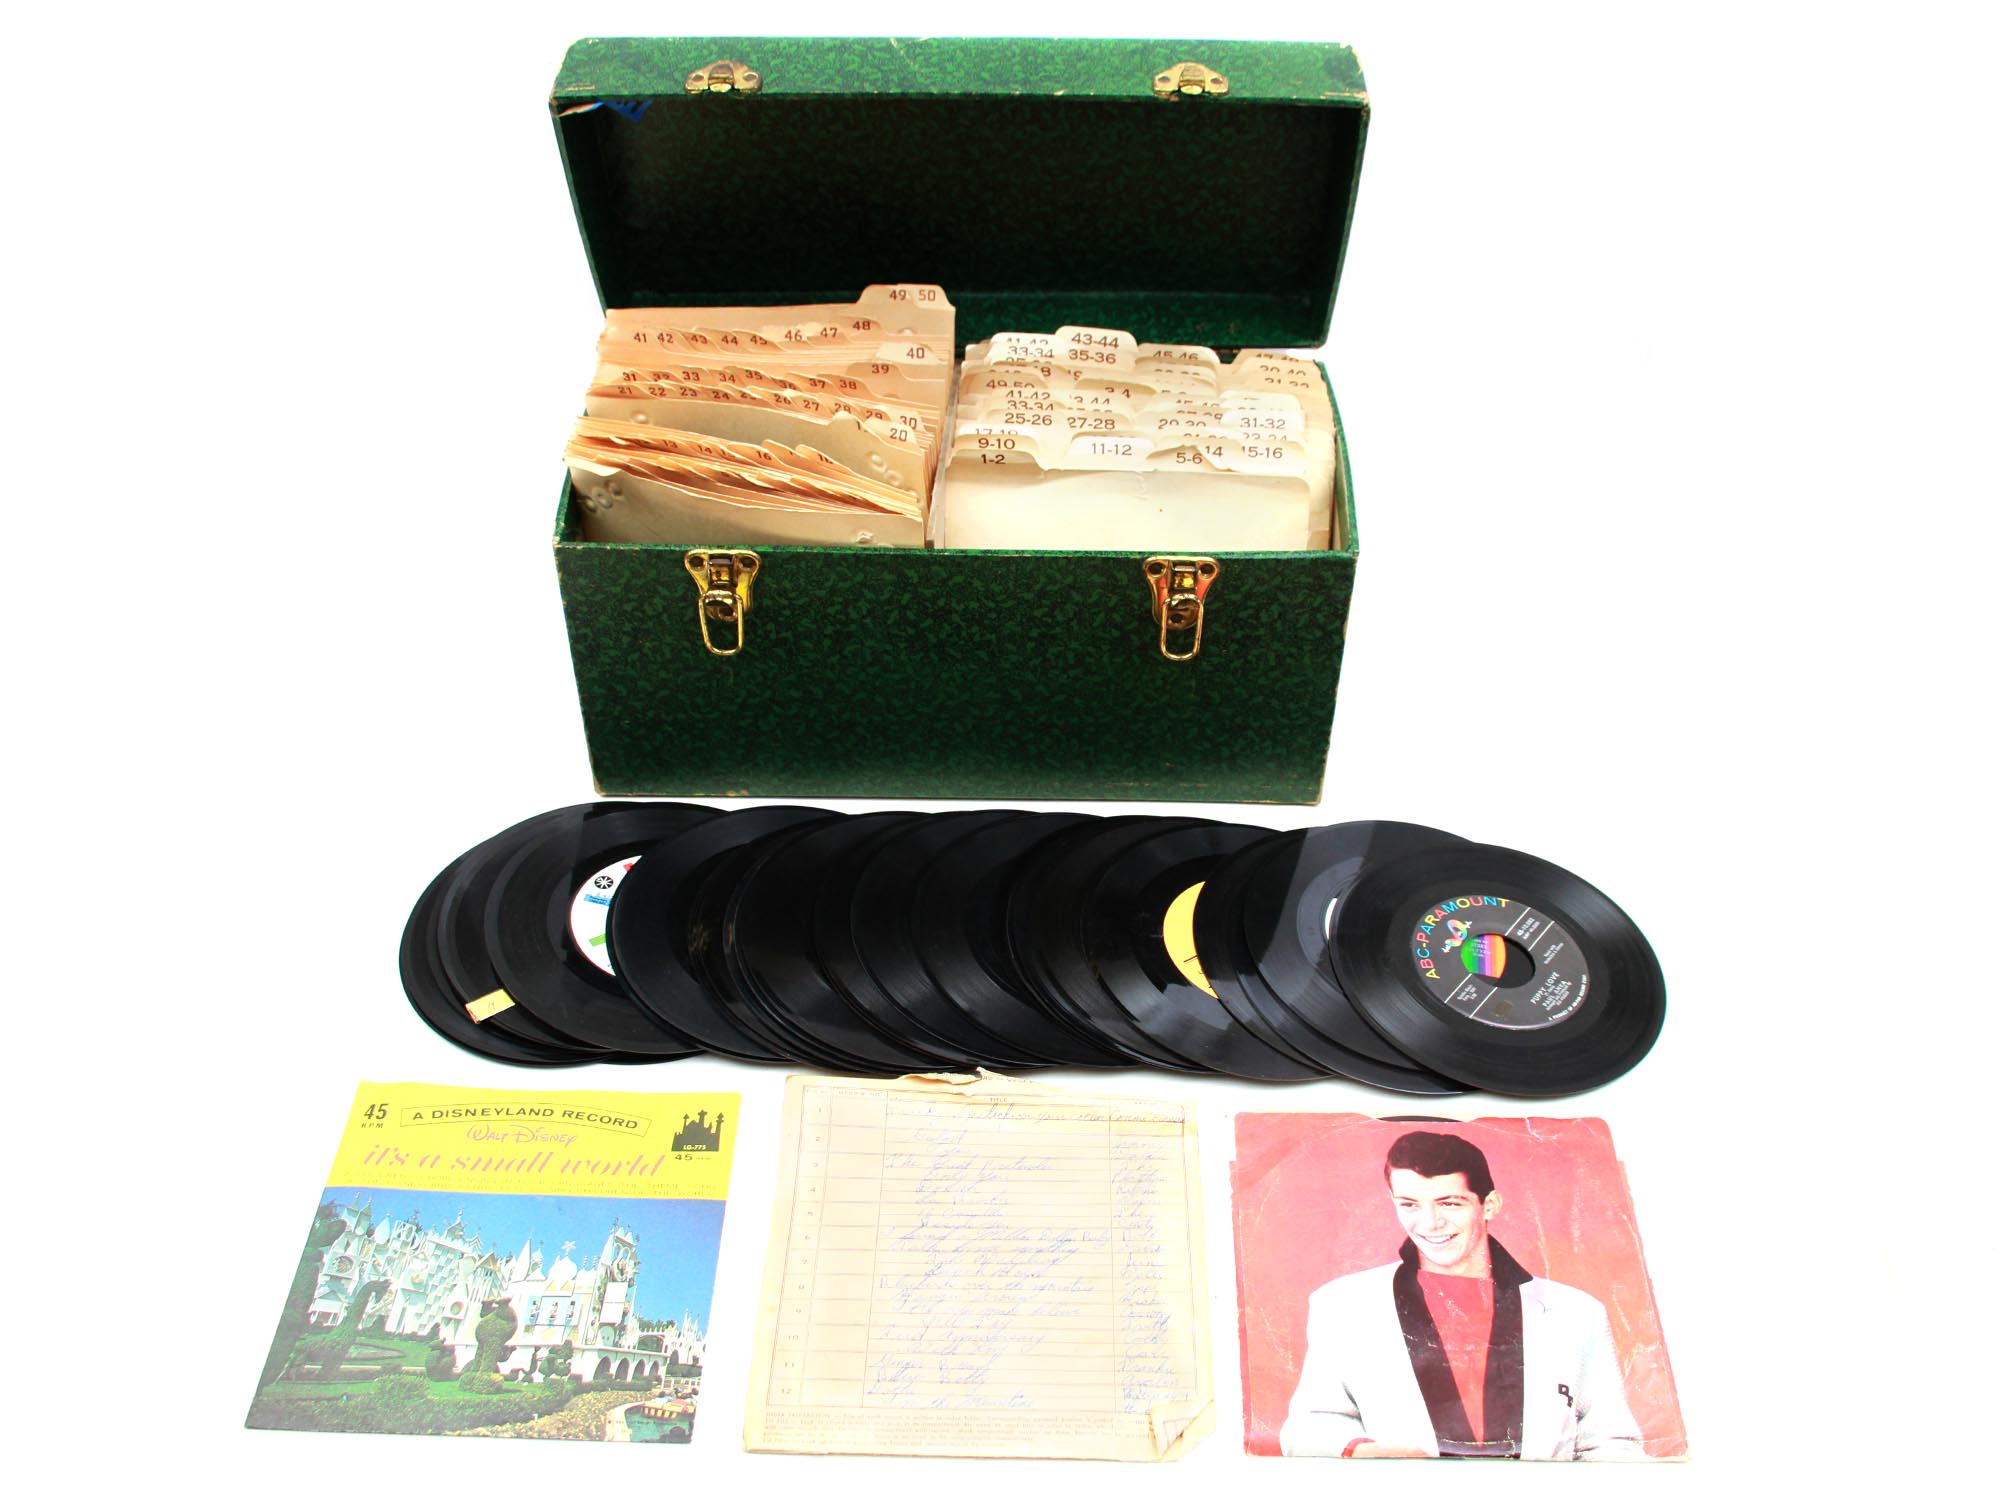 A VINTAGE RECORD CASE WITH LARGE COLLECTION OF LP PIC-0